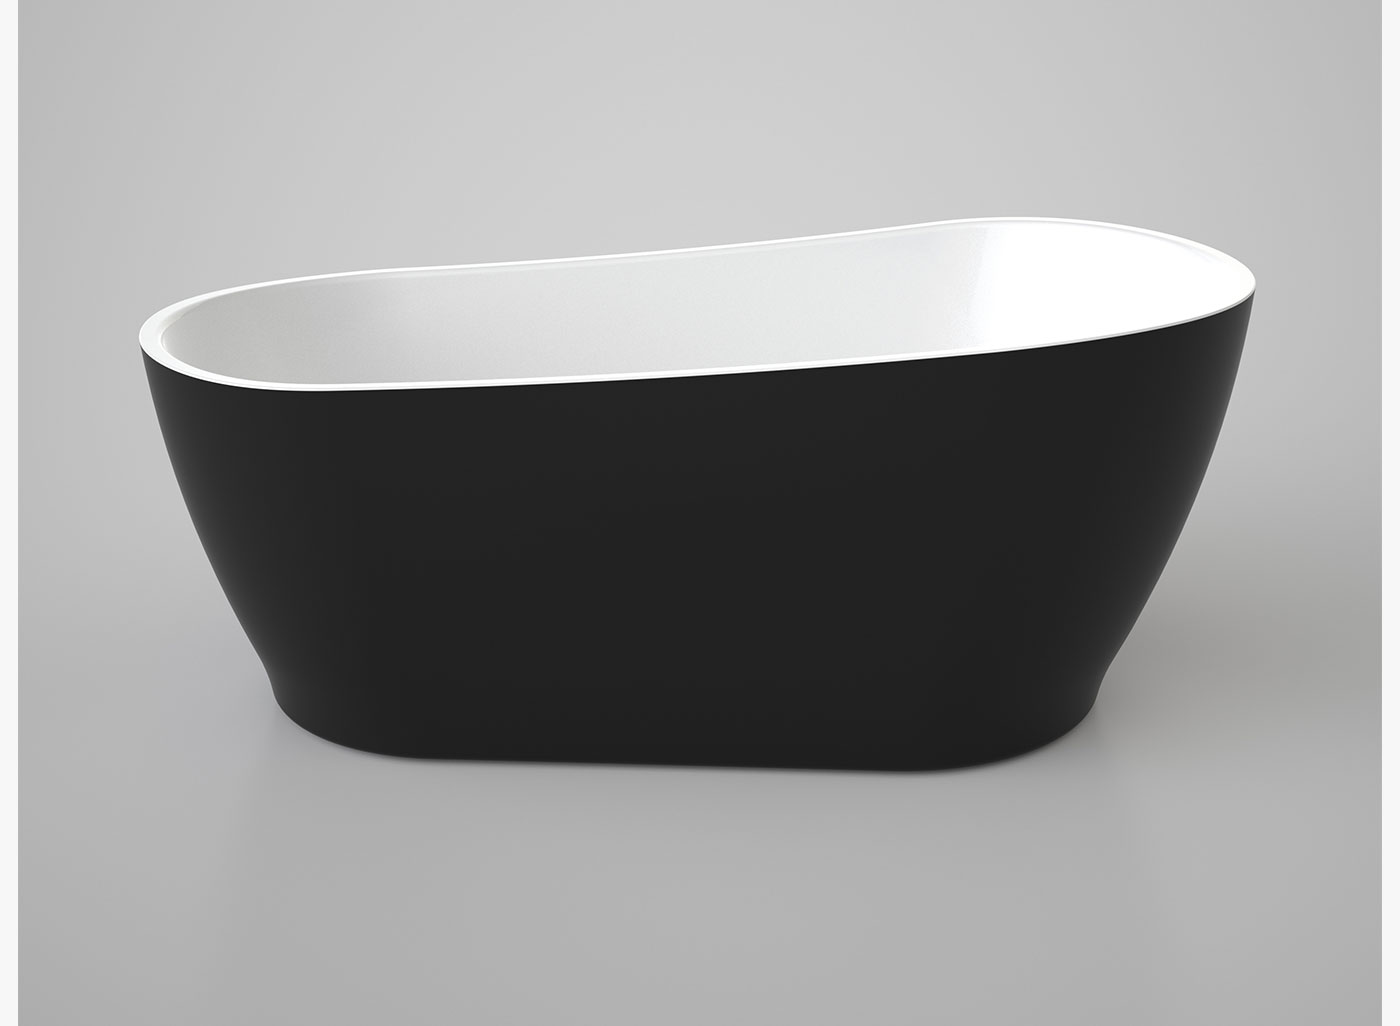 Noir freestanding bath has a distinct two tone colouring and seamless look. With a spectacular organic shape